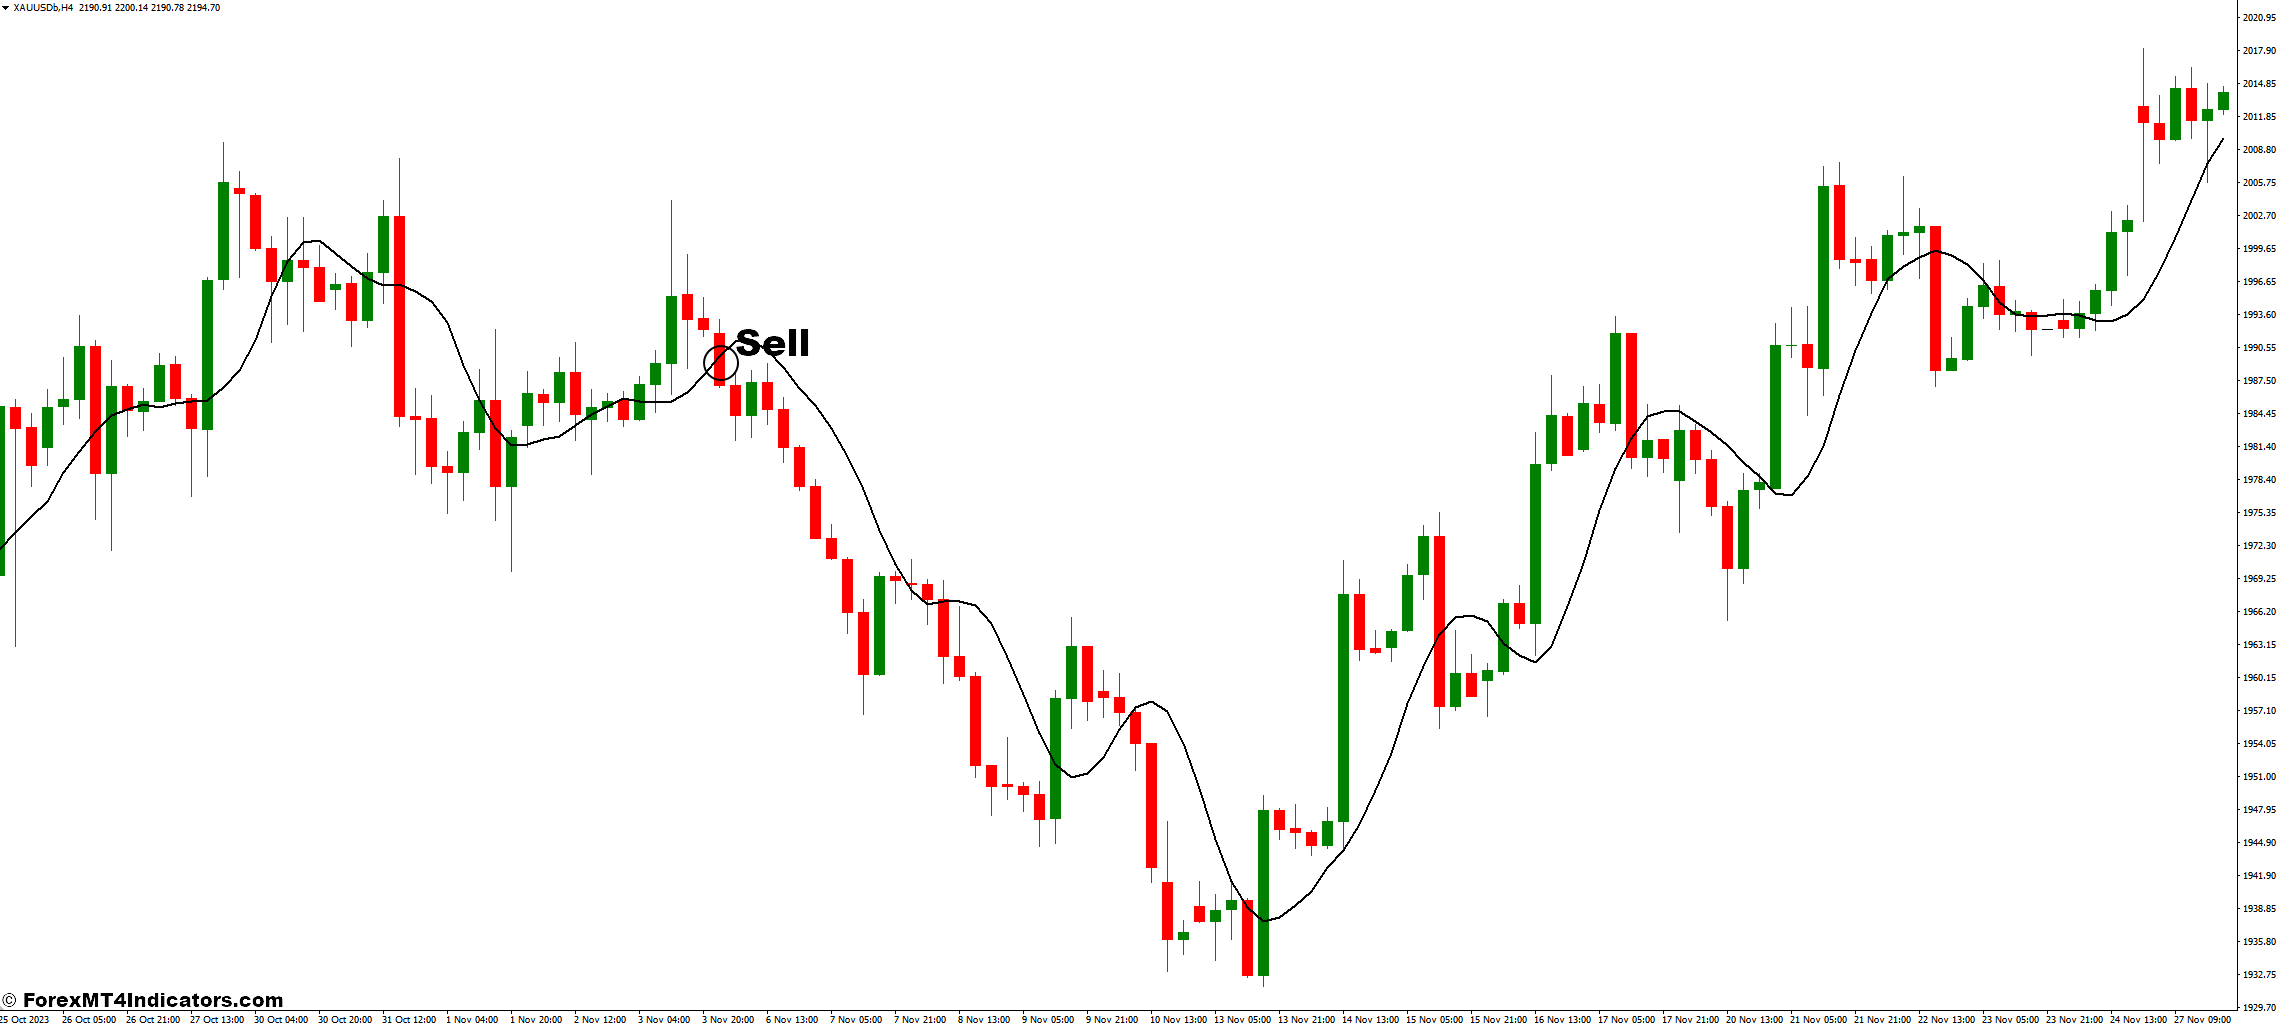 How to Trade with TMA MT4 Indicator - Sell Entry